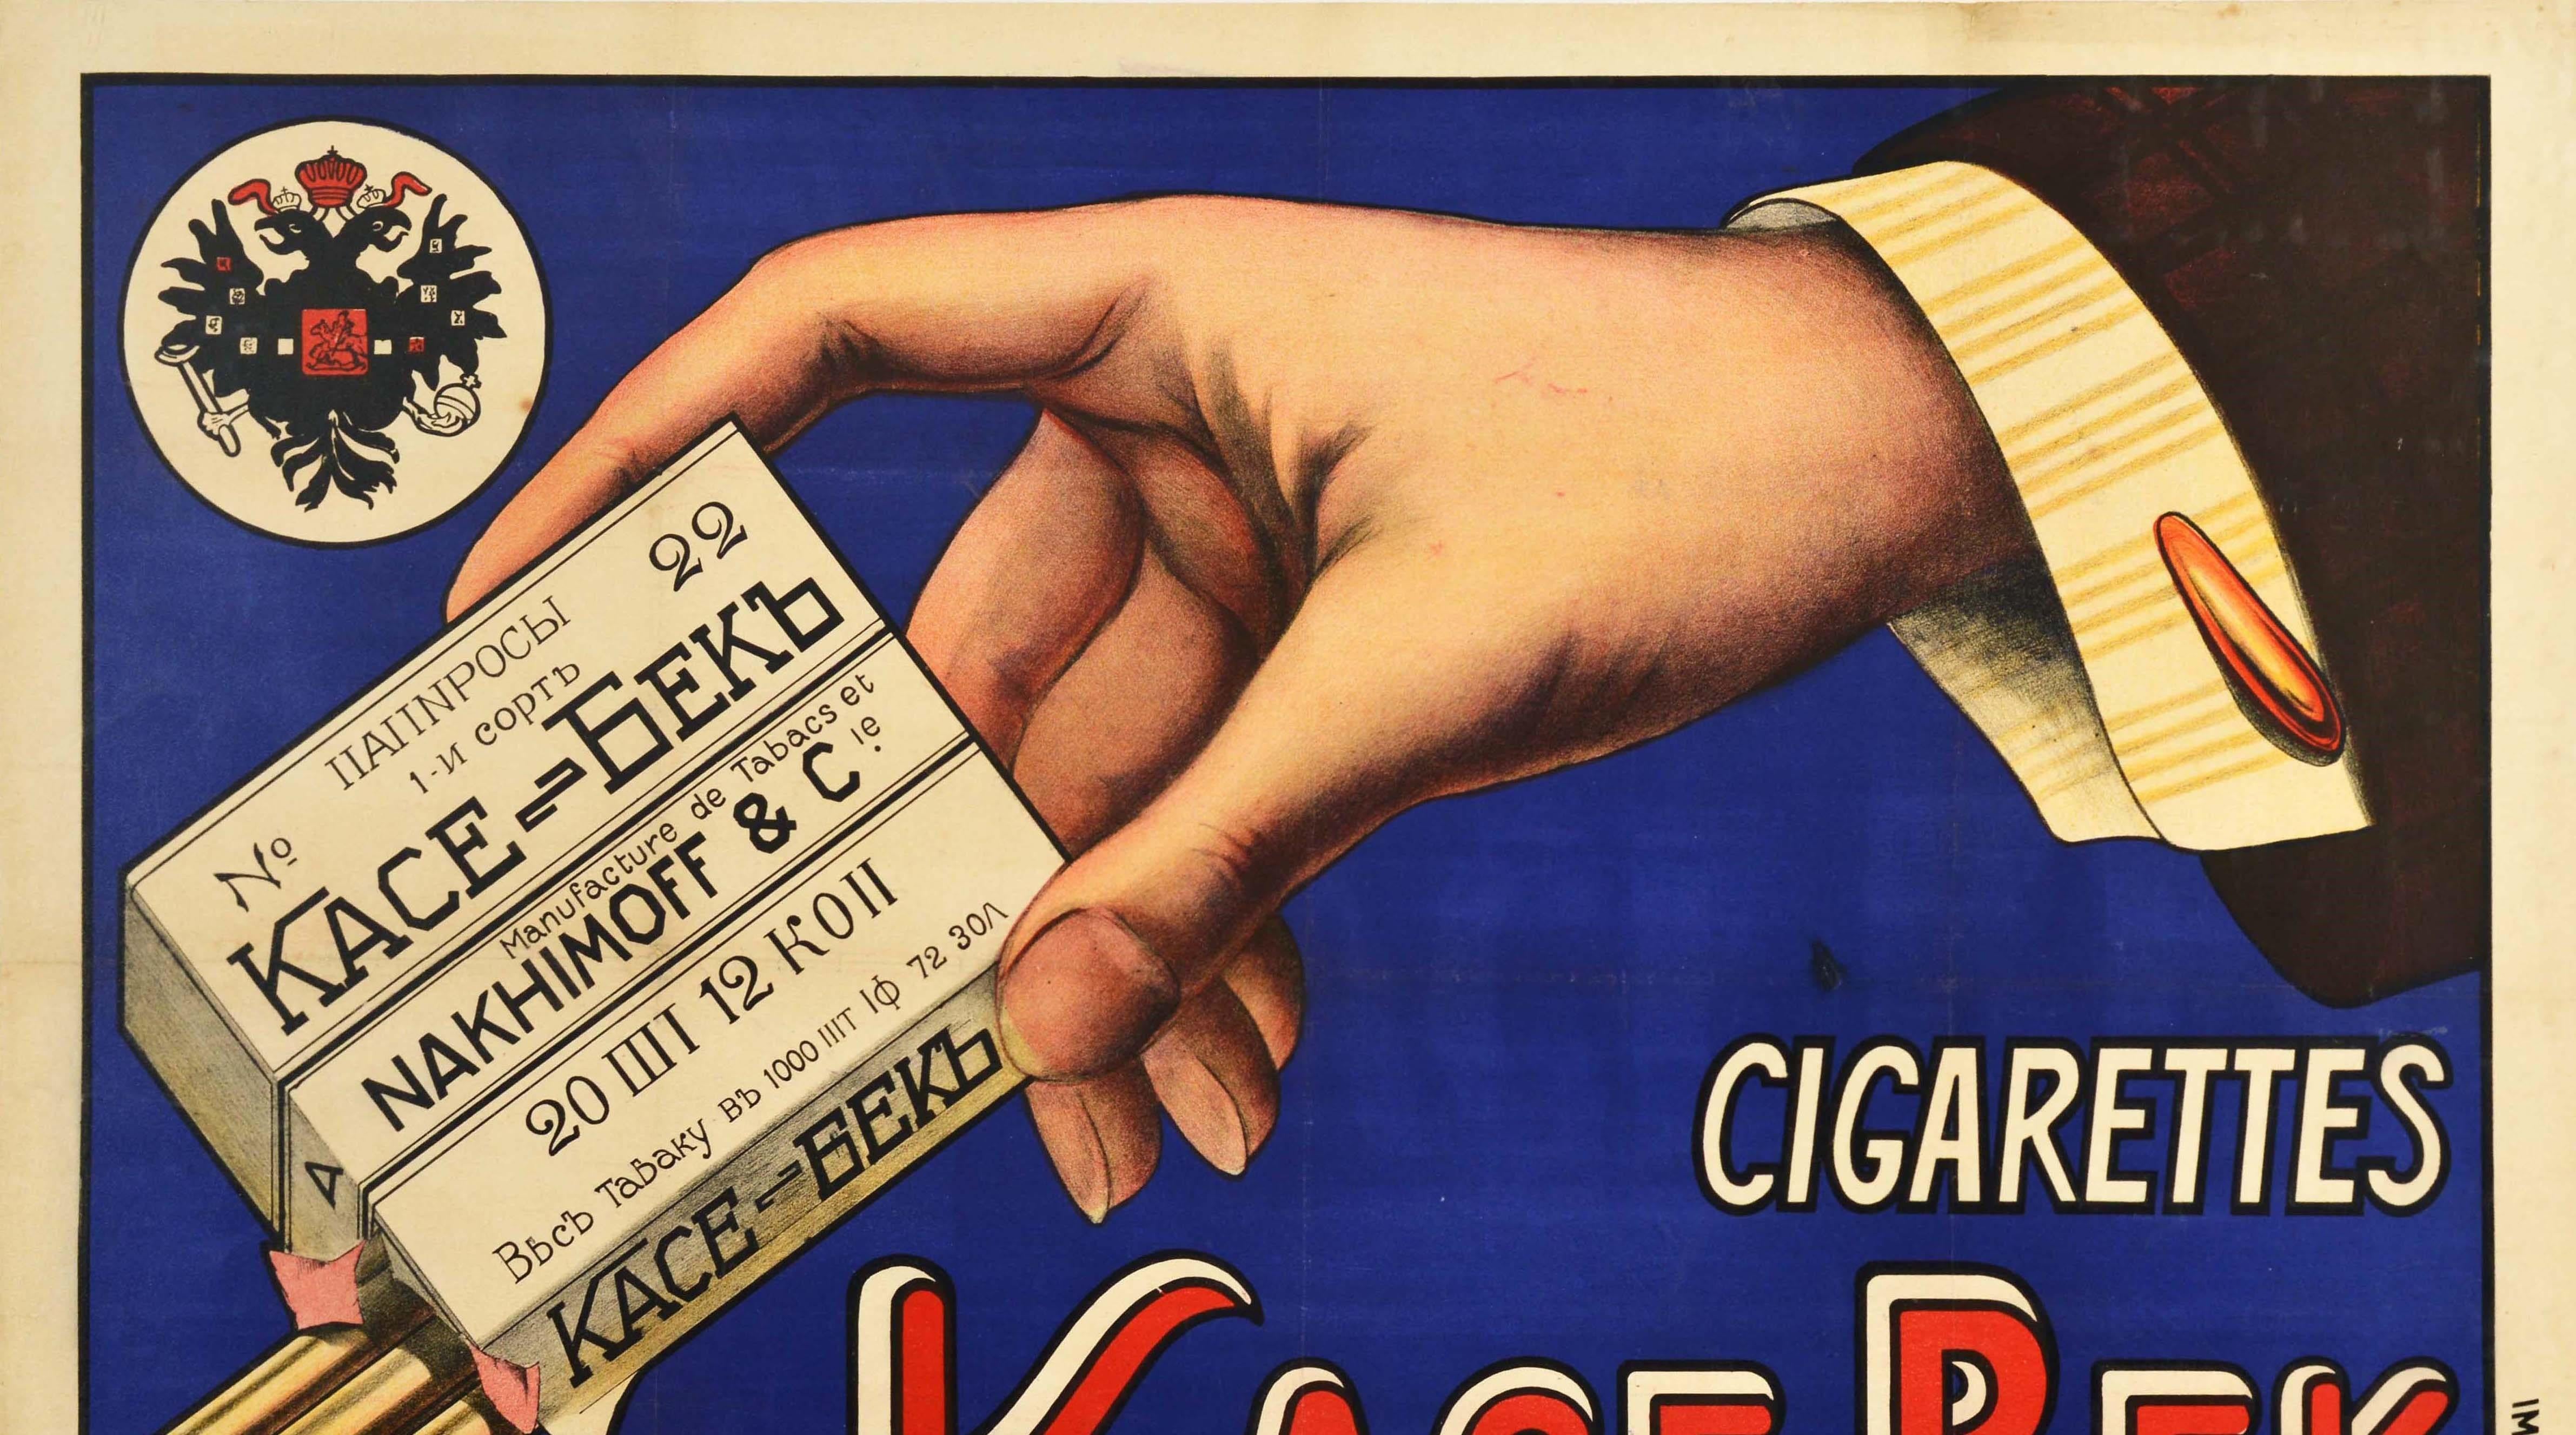 Original antique advertising poster issued in Belgium to promote a Russian brand of cigarettes KaceBek / ??????? ????-??? manufactured in Imperial Russia before the 1917 October Revolution by Nakhimoff & Co. Great design featuring a hand tipping